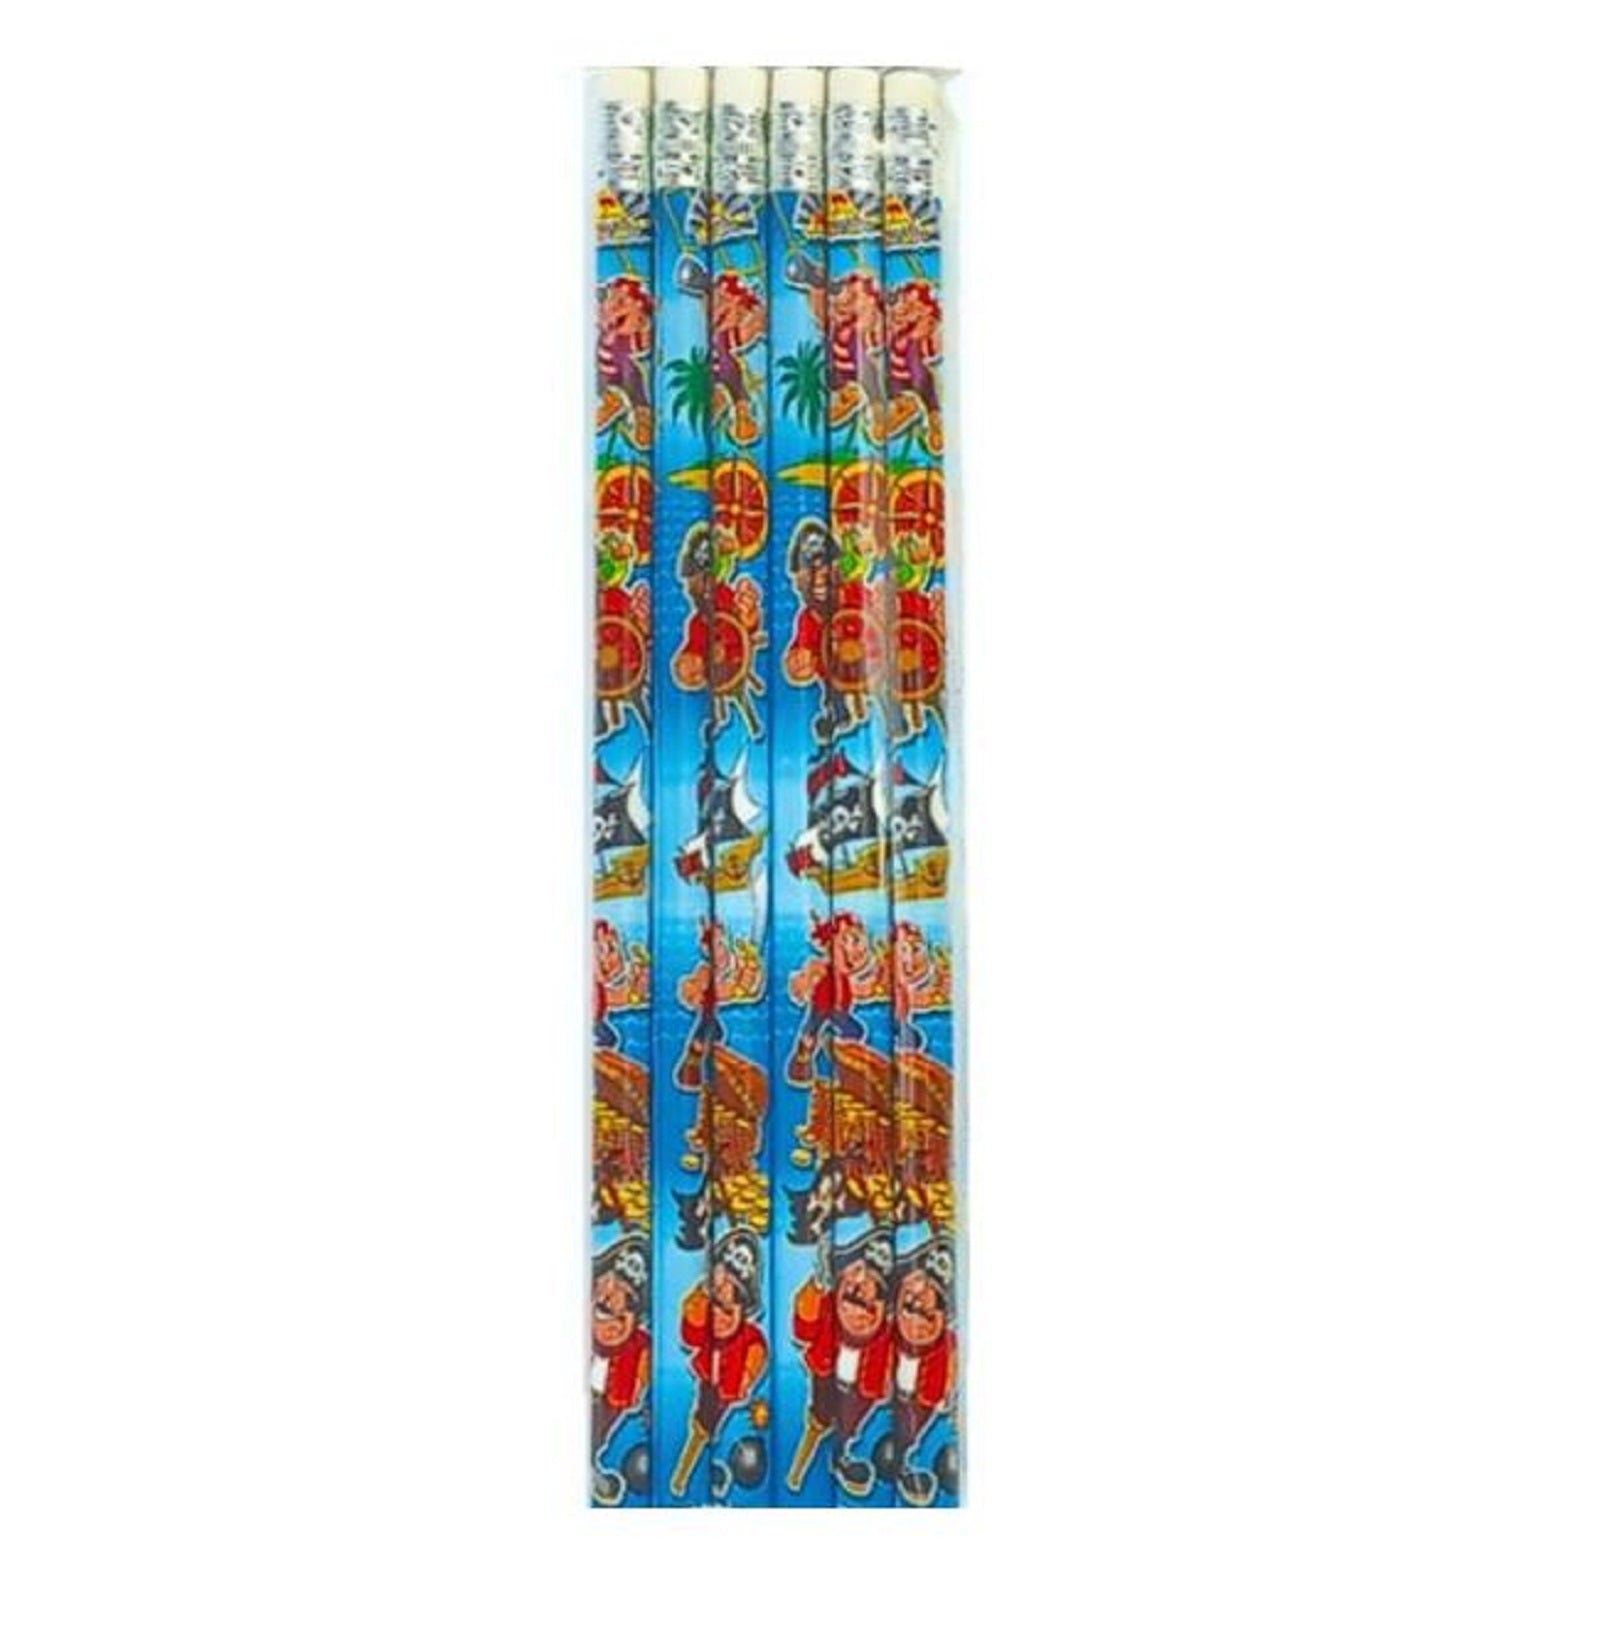 Pirate Pencil with Eraser Party Bag Toy Favor 6pk